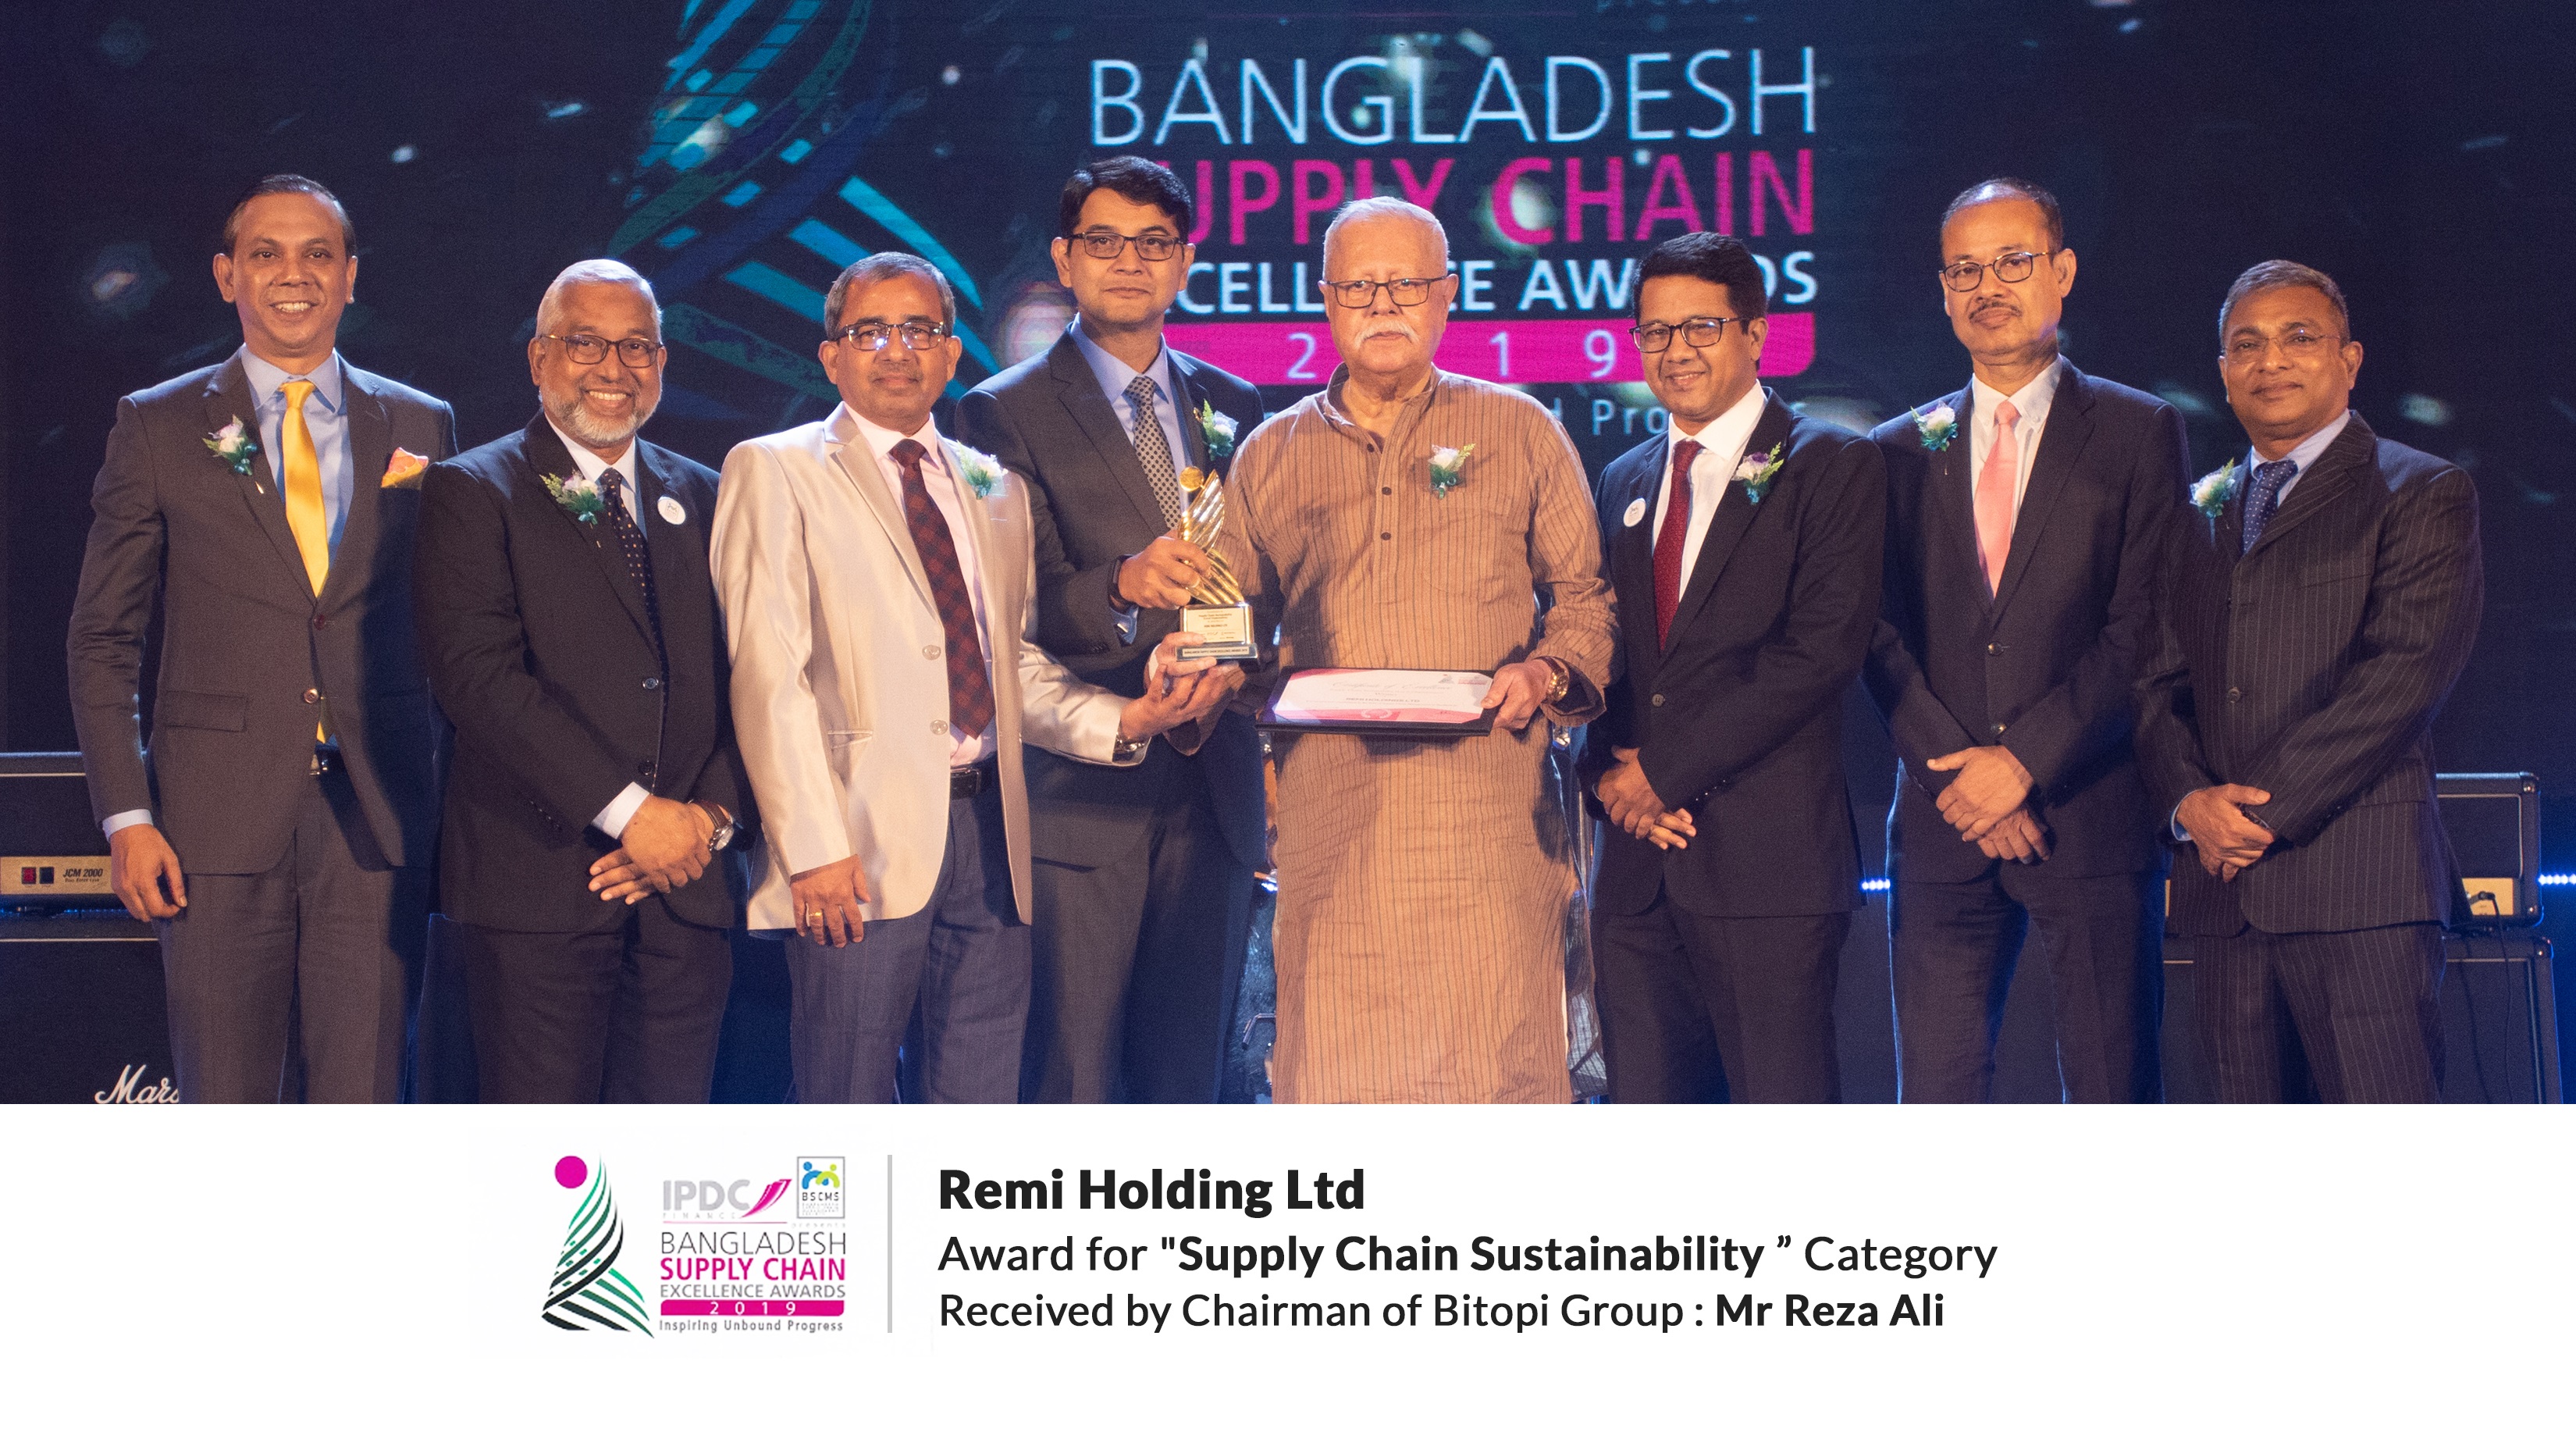 IPDC Bangladesh Supply Chain Excellence Awards 2019